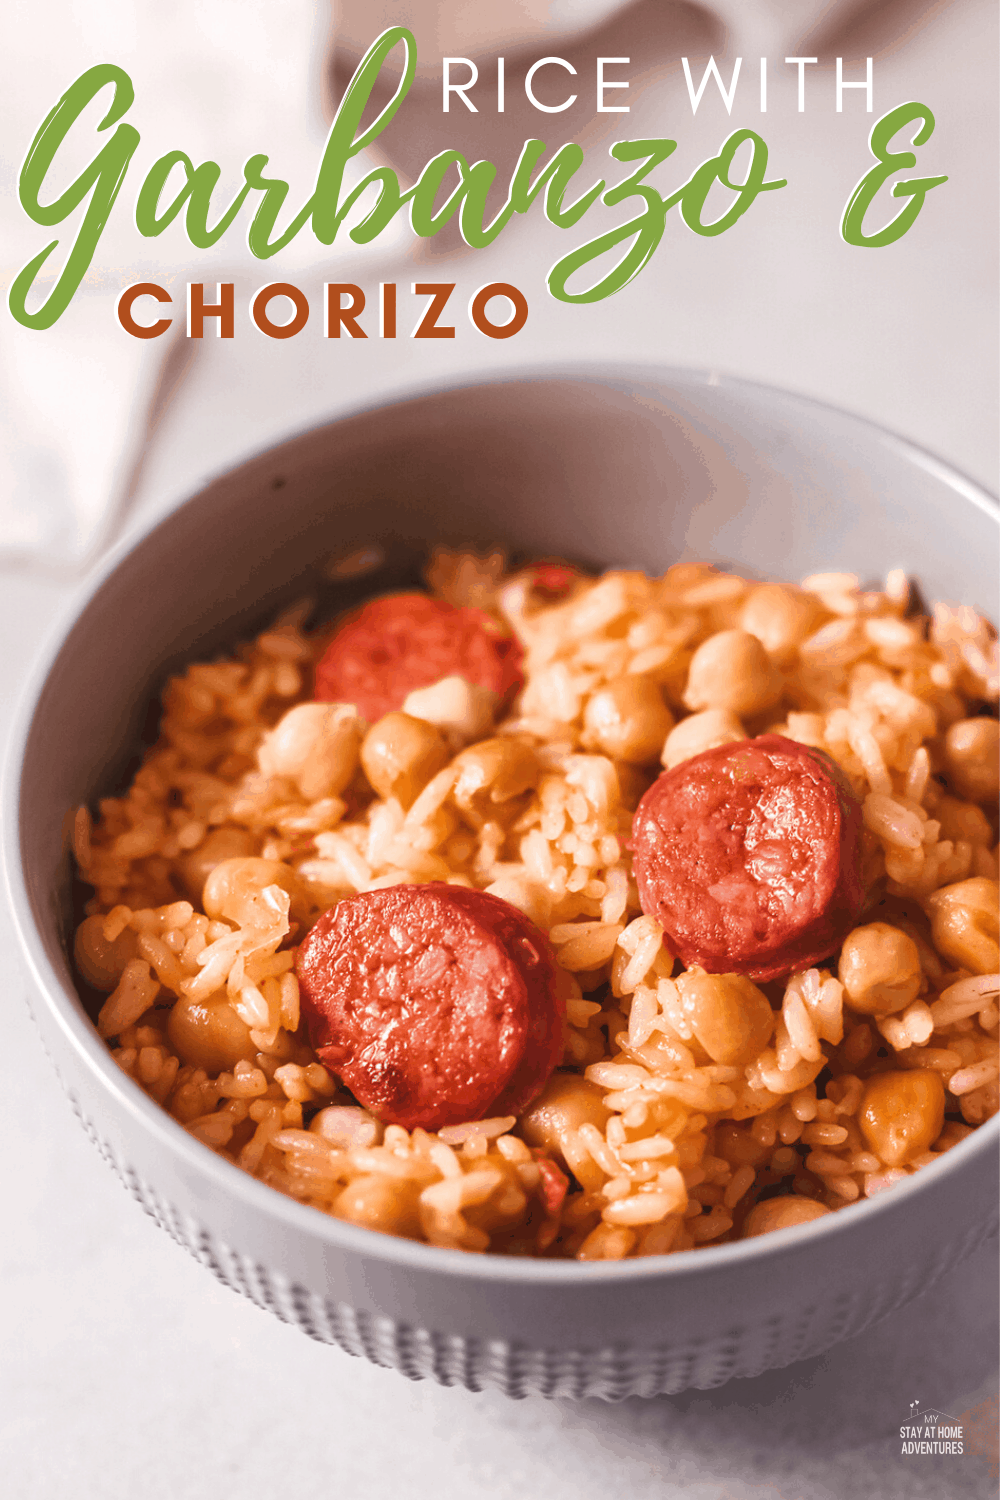 Arroz con chorizo y garbanzo (rice and garbanzo beans) is a flavorful combination of rice, sausage, and garbanzo beans. This easy dish is an inexpensive and delicious meal. via @mystayathome